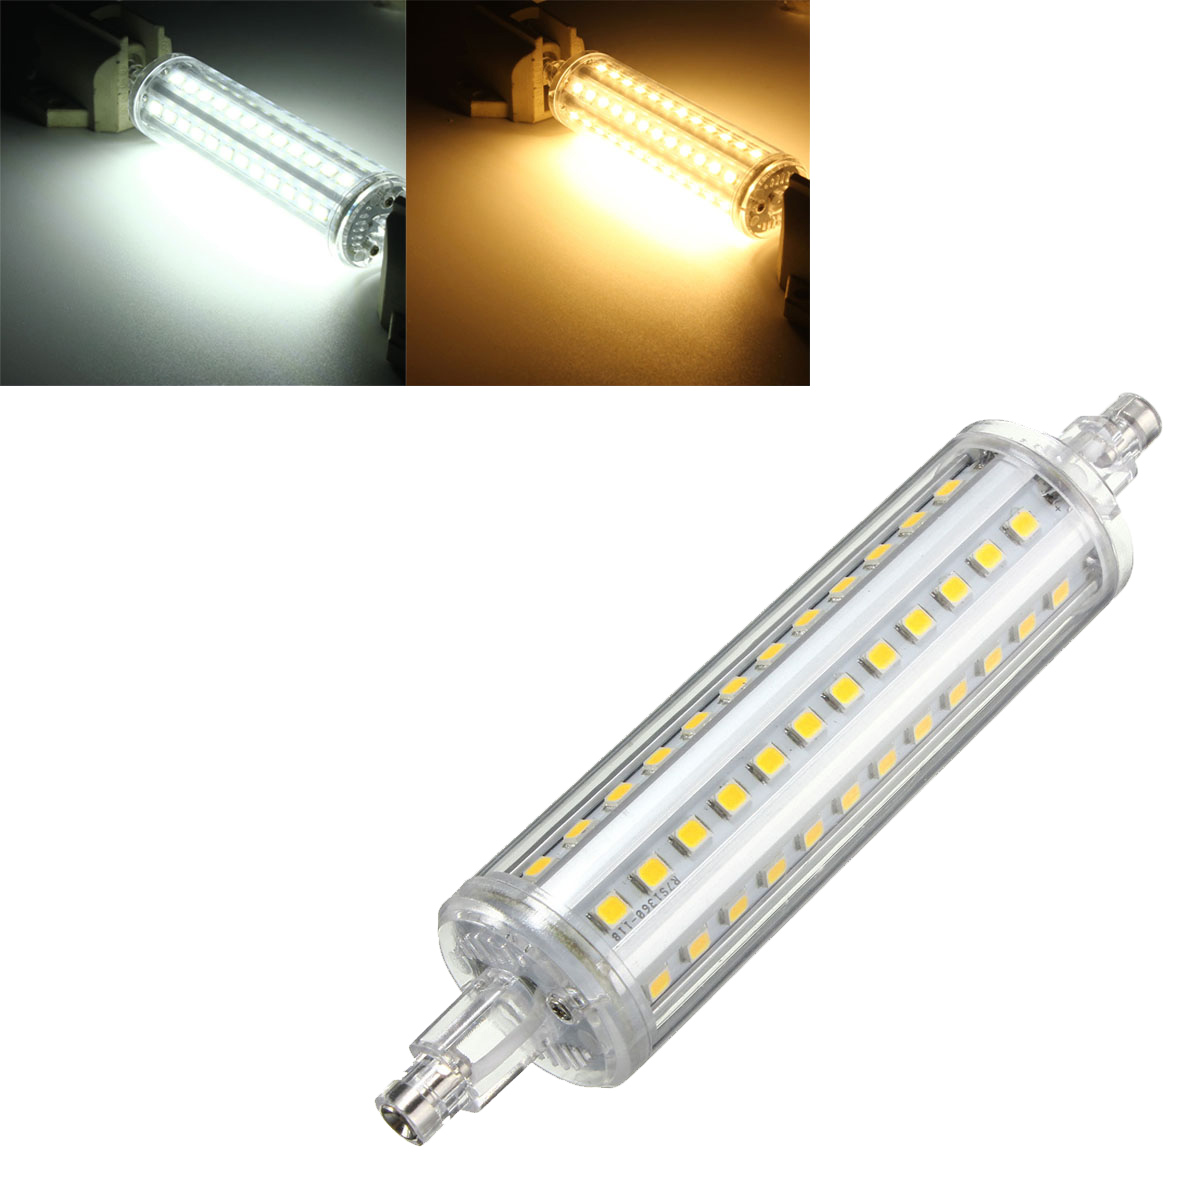 

Dimmable R7S 8W 118MM 72 SMD 2835 LED Pure White Warm White Corn Light Lamp Bulb AC85-265V